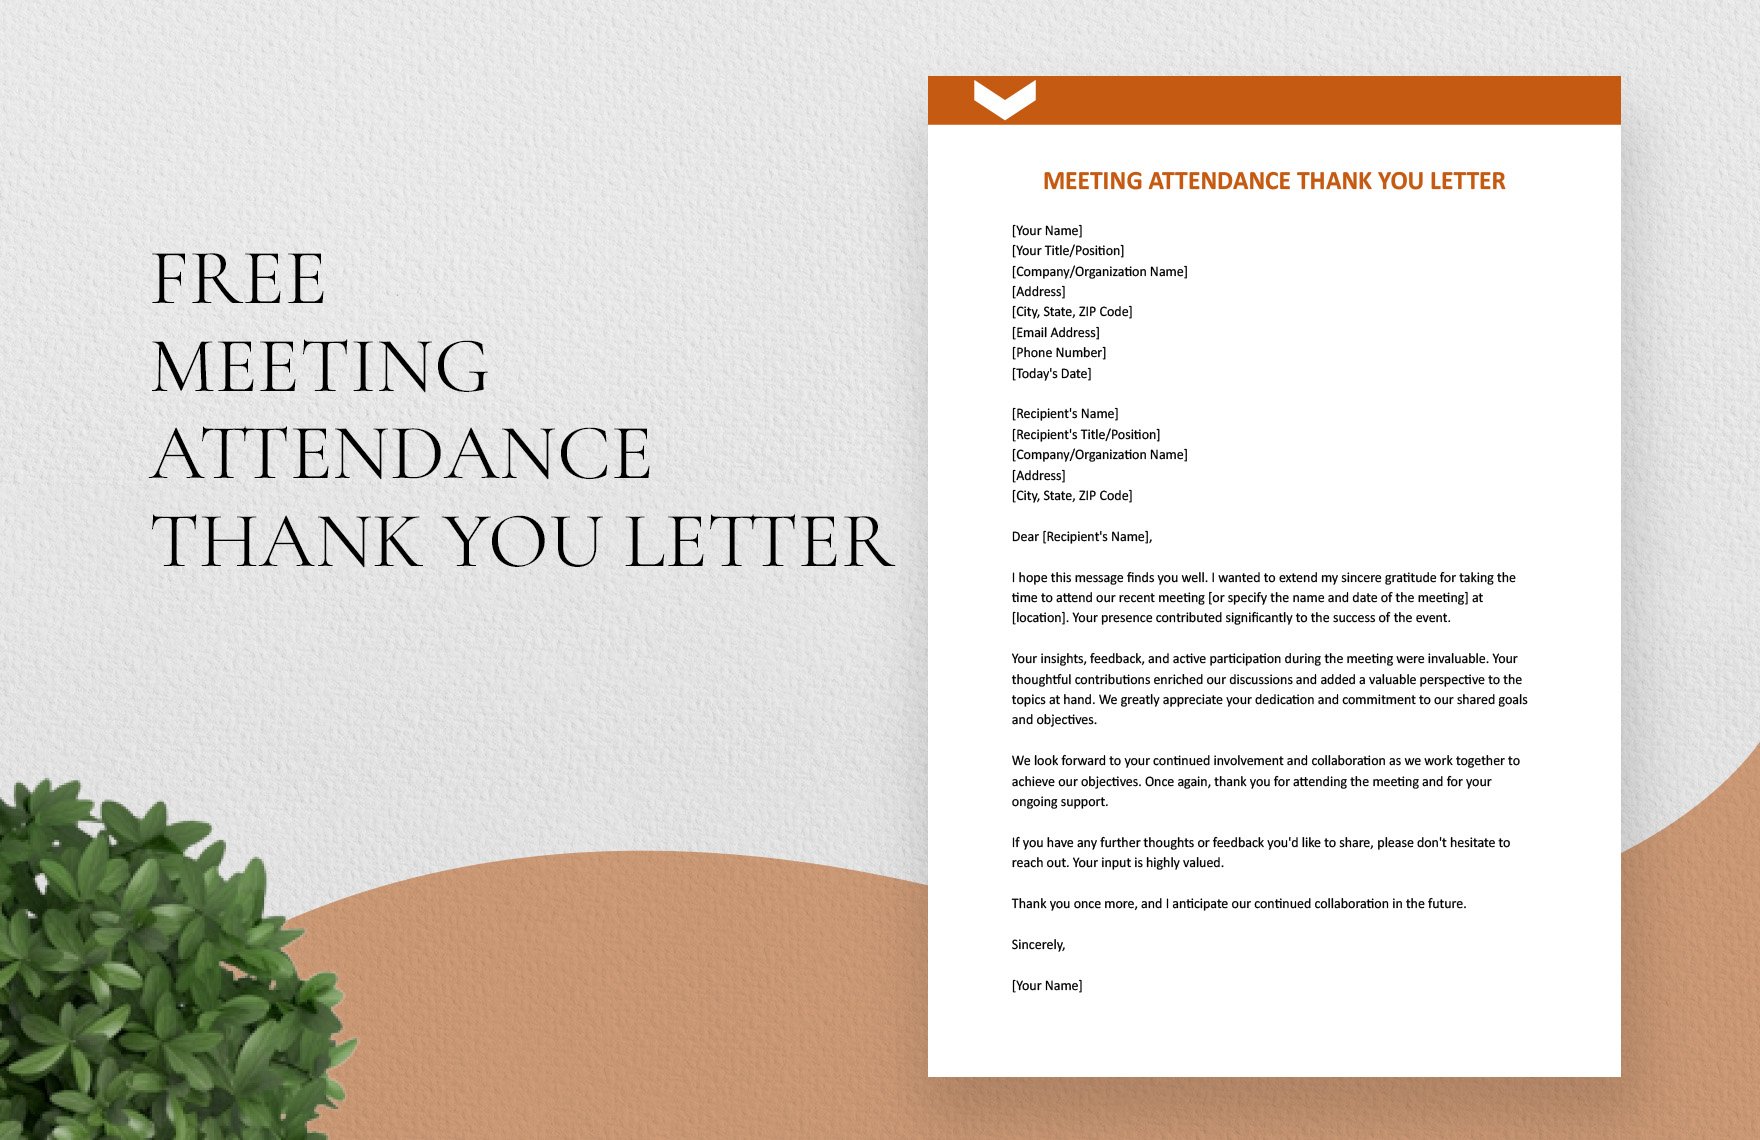 Free Meeting Attendance Thank You Letter